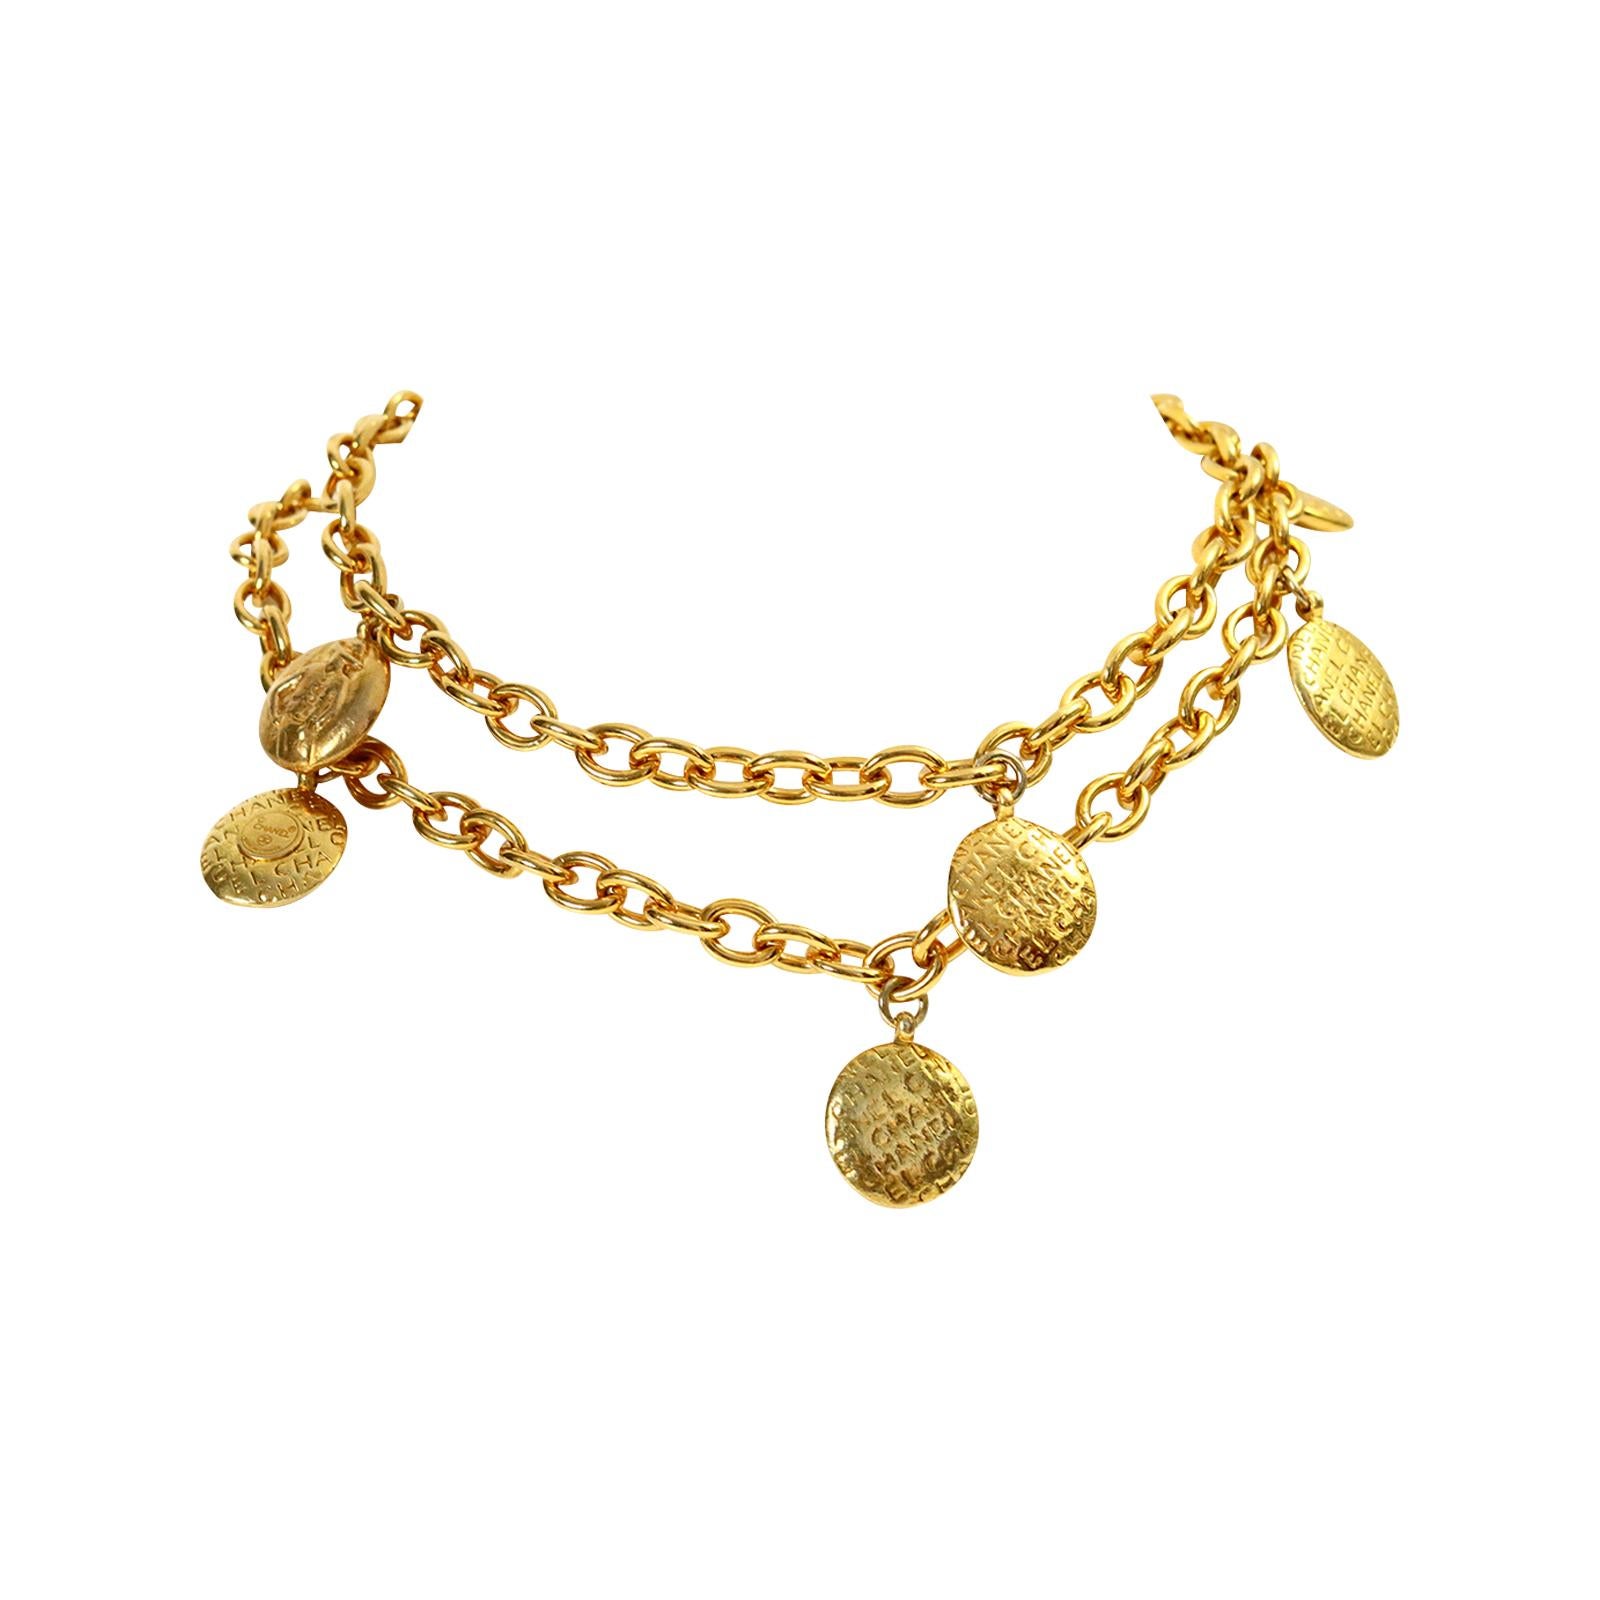 Vintage Chanel Gold Disc Chanel and Coco on Long Necklace Circa 1980s For Sale 12